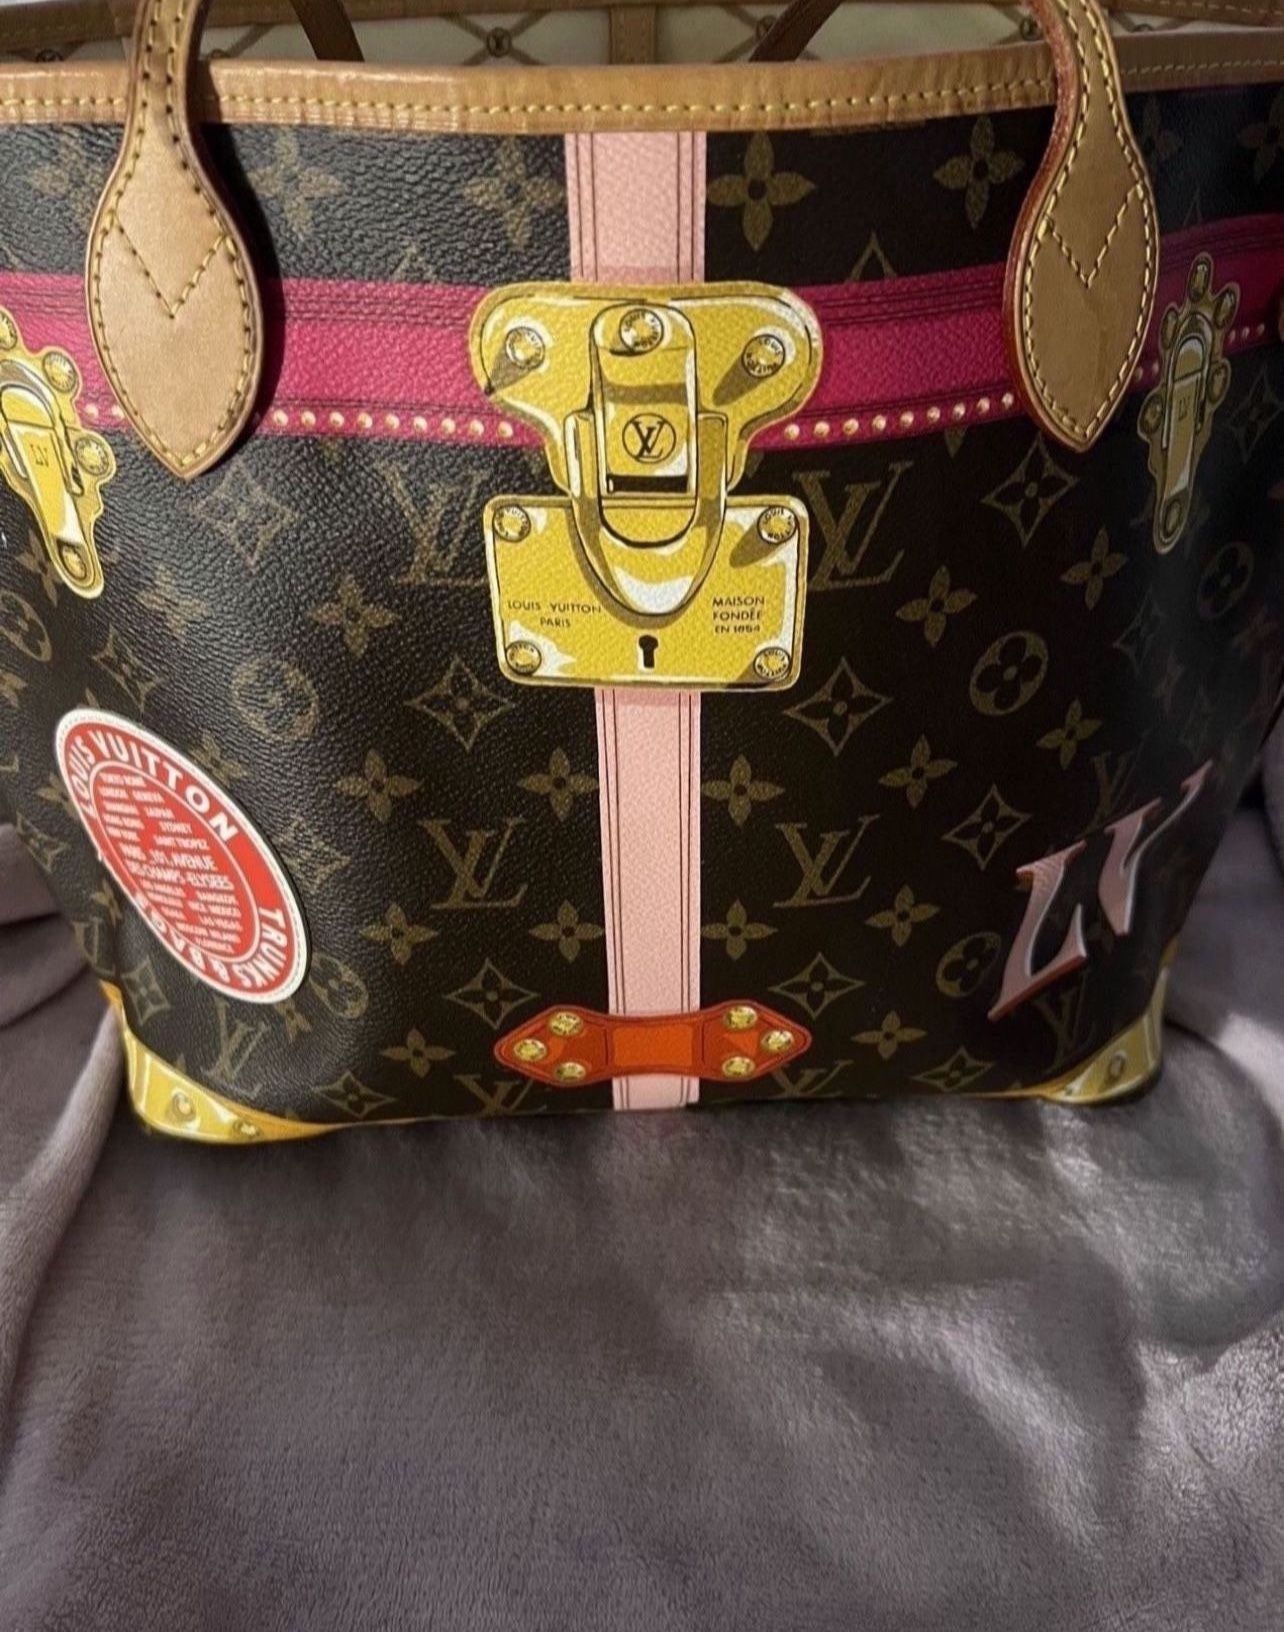 Louis Vuitton Bag for Sale in The Bronx, NY - OfferUp